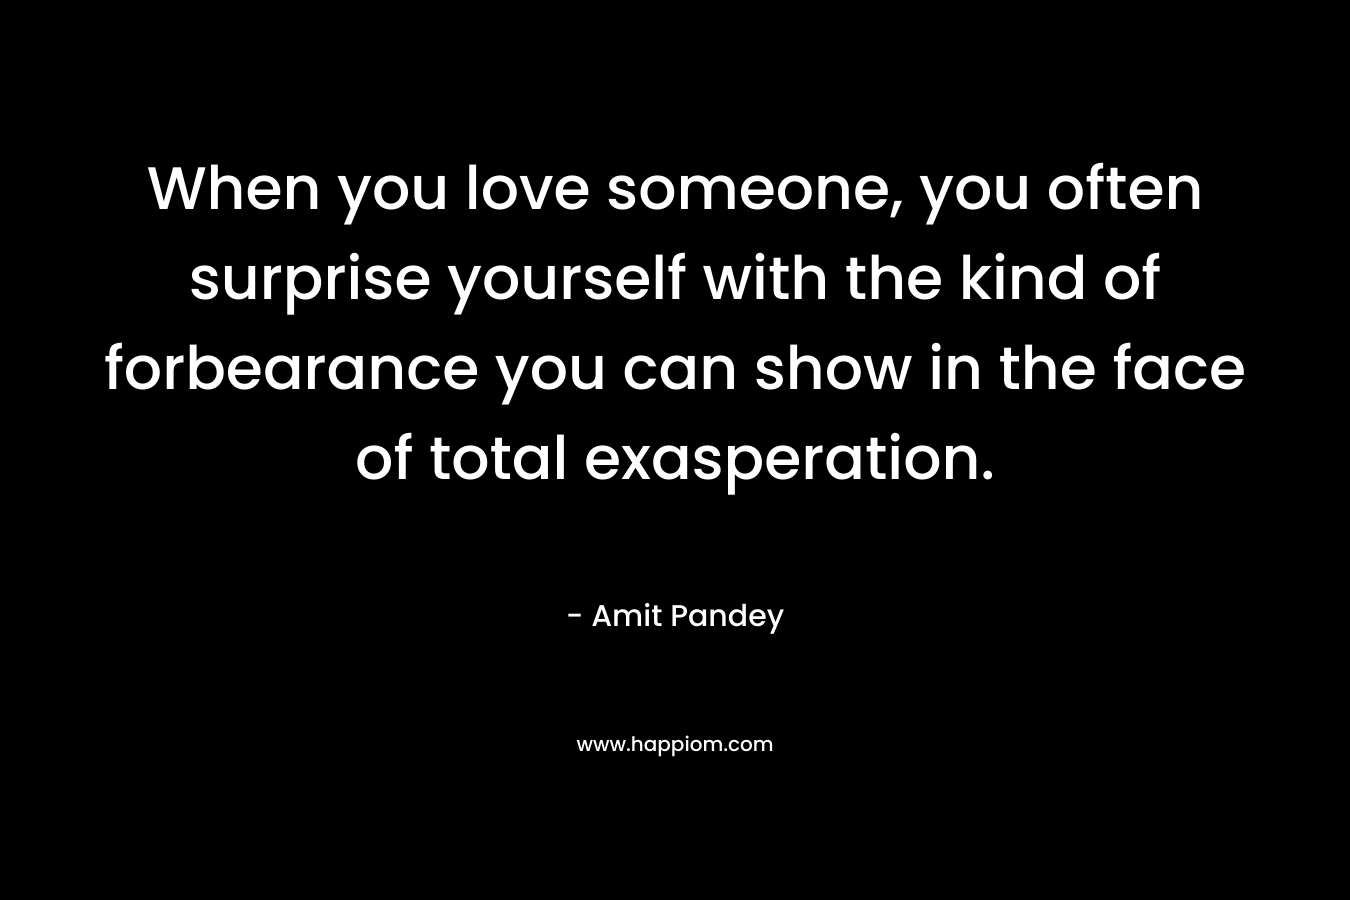 When you love someone, you often surprise yourself with the kind of forbearance you can show in the face of total exasperation. – Amit  Pandey